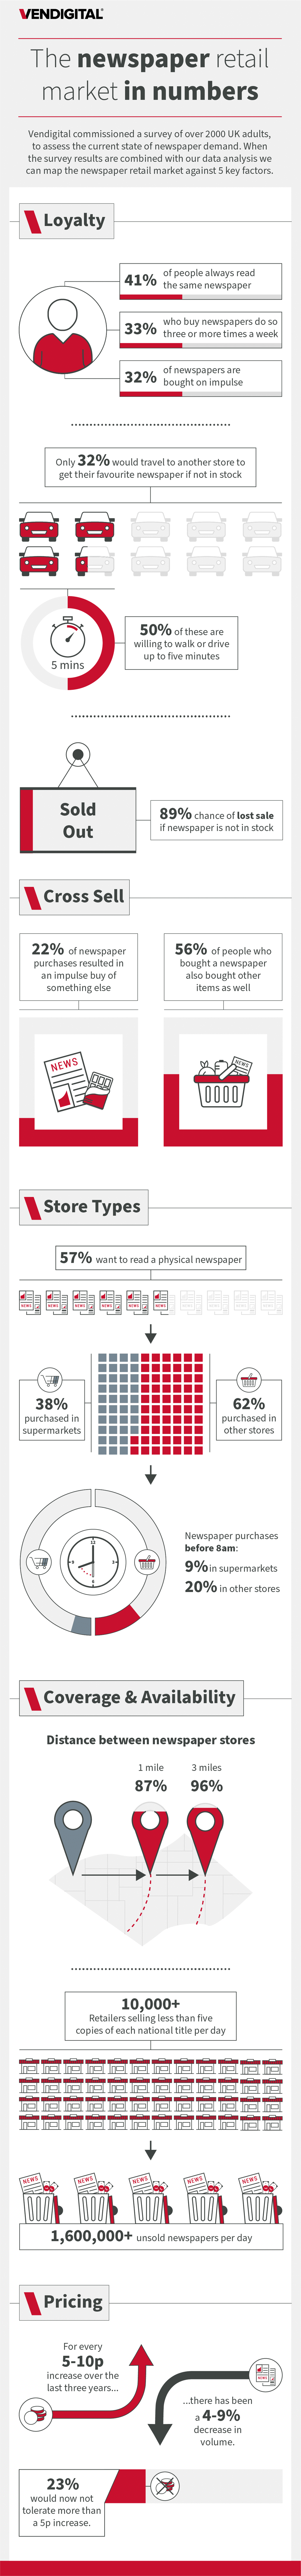 Infographic - The Newspaper Retail Market in Numbers